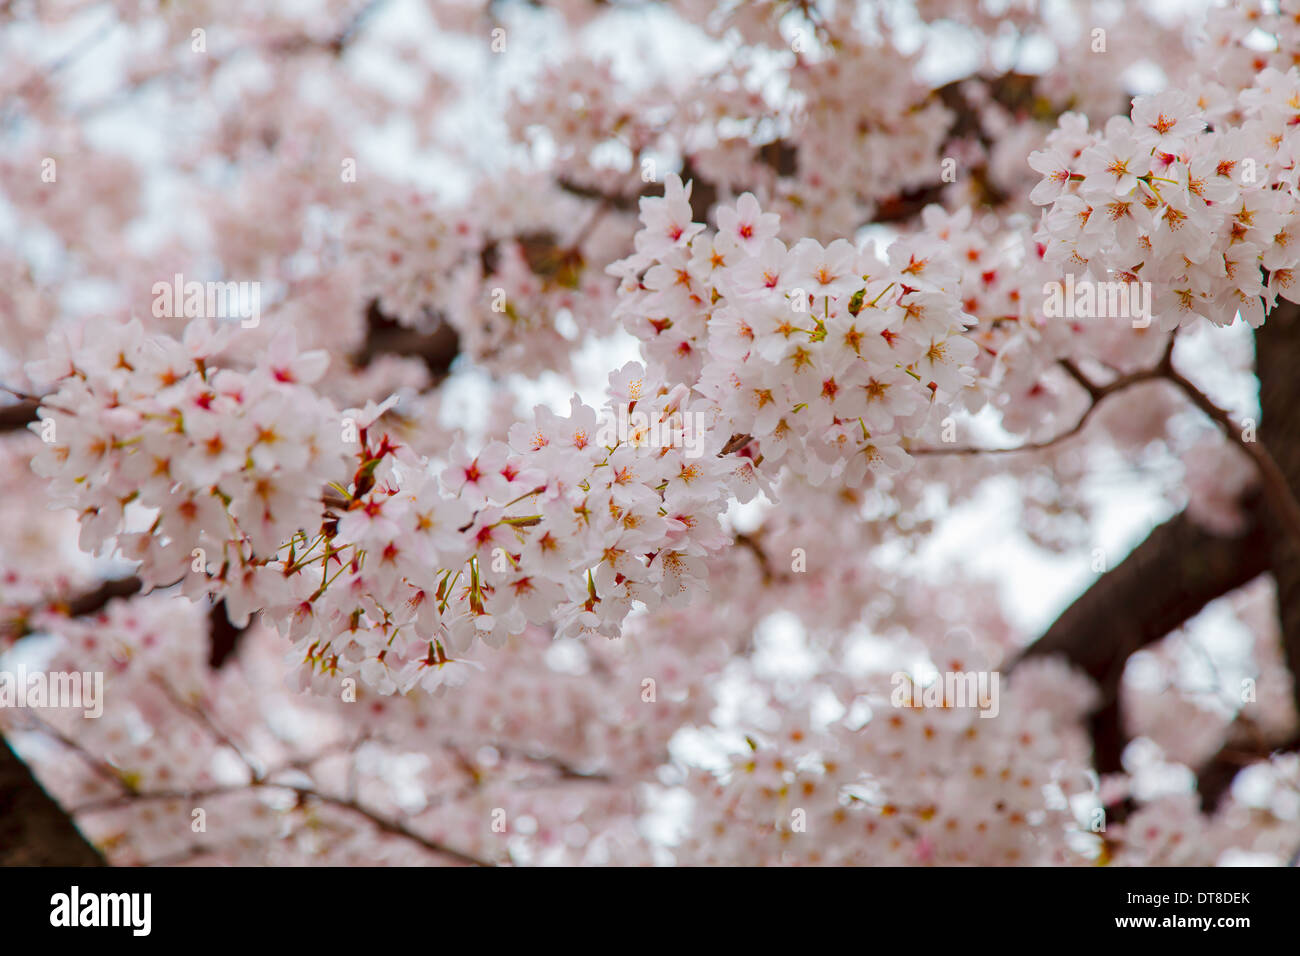 Pink cherry blossom trees along the pathway in springtime, Japan Stock Photo